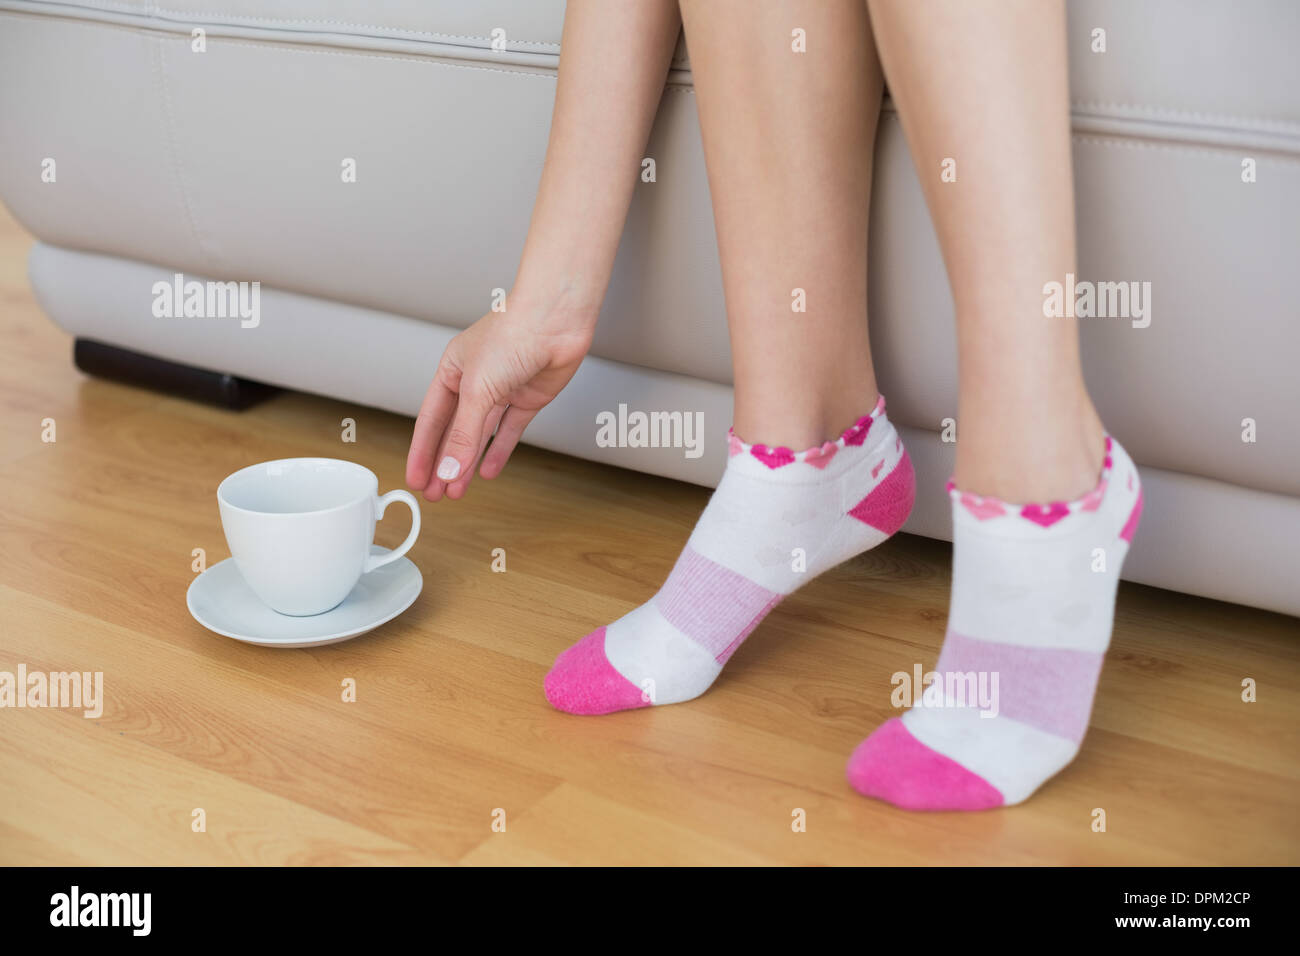 Young slender woman wearing pink socks sitting on couch Stock Photo